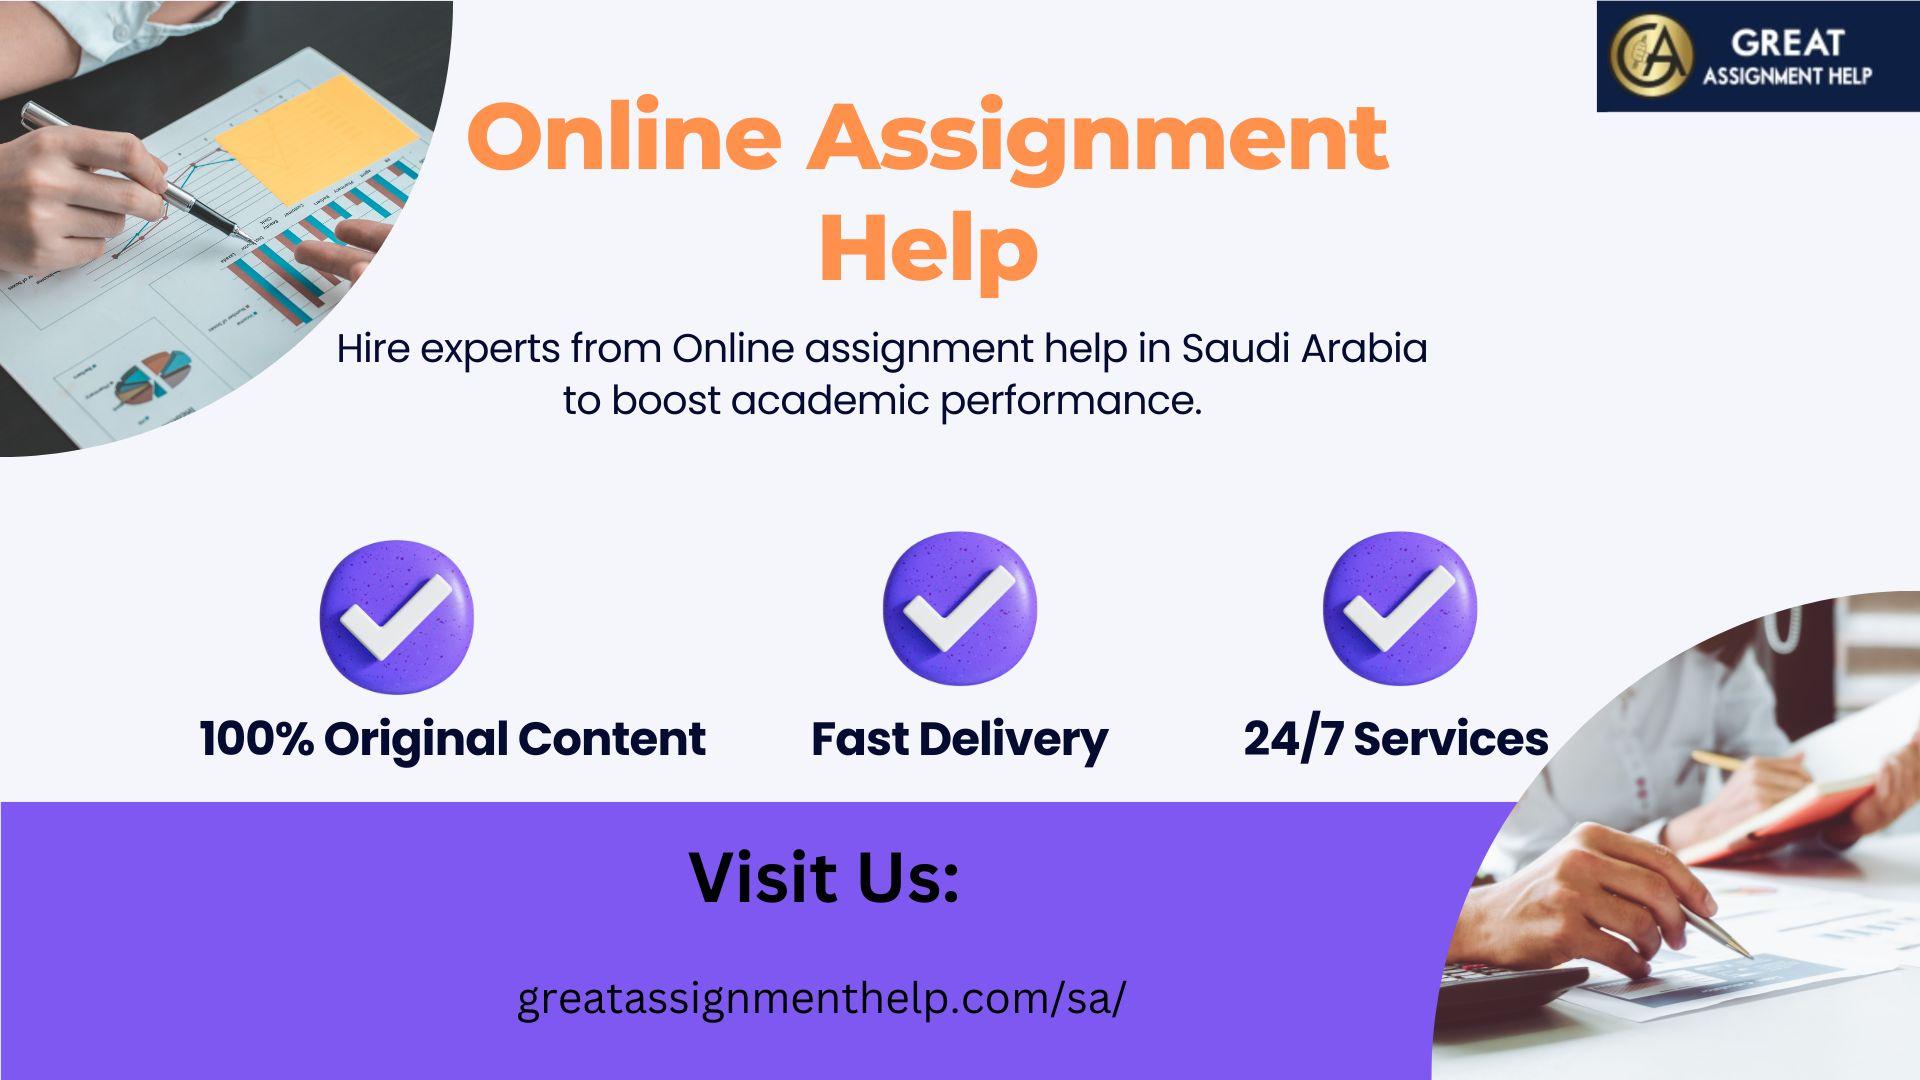 assignment assistance south africa